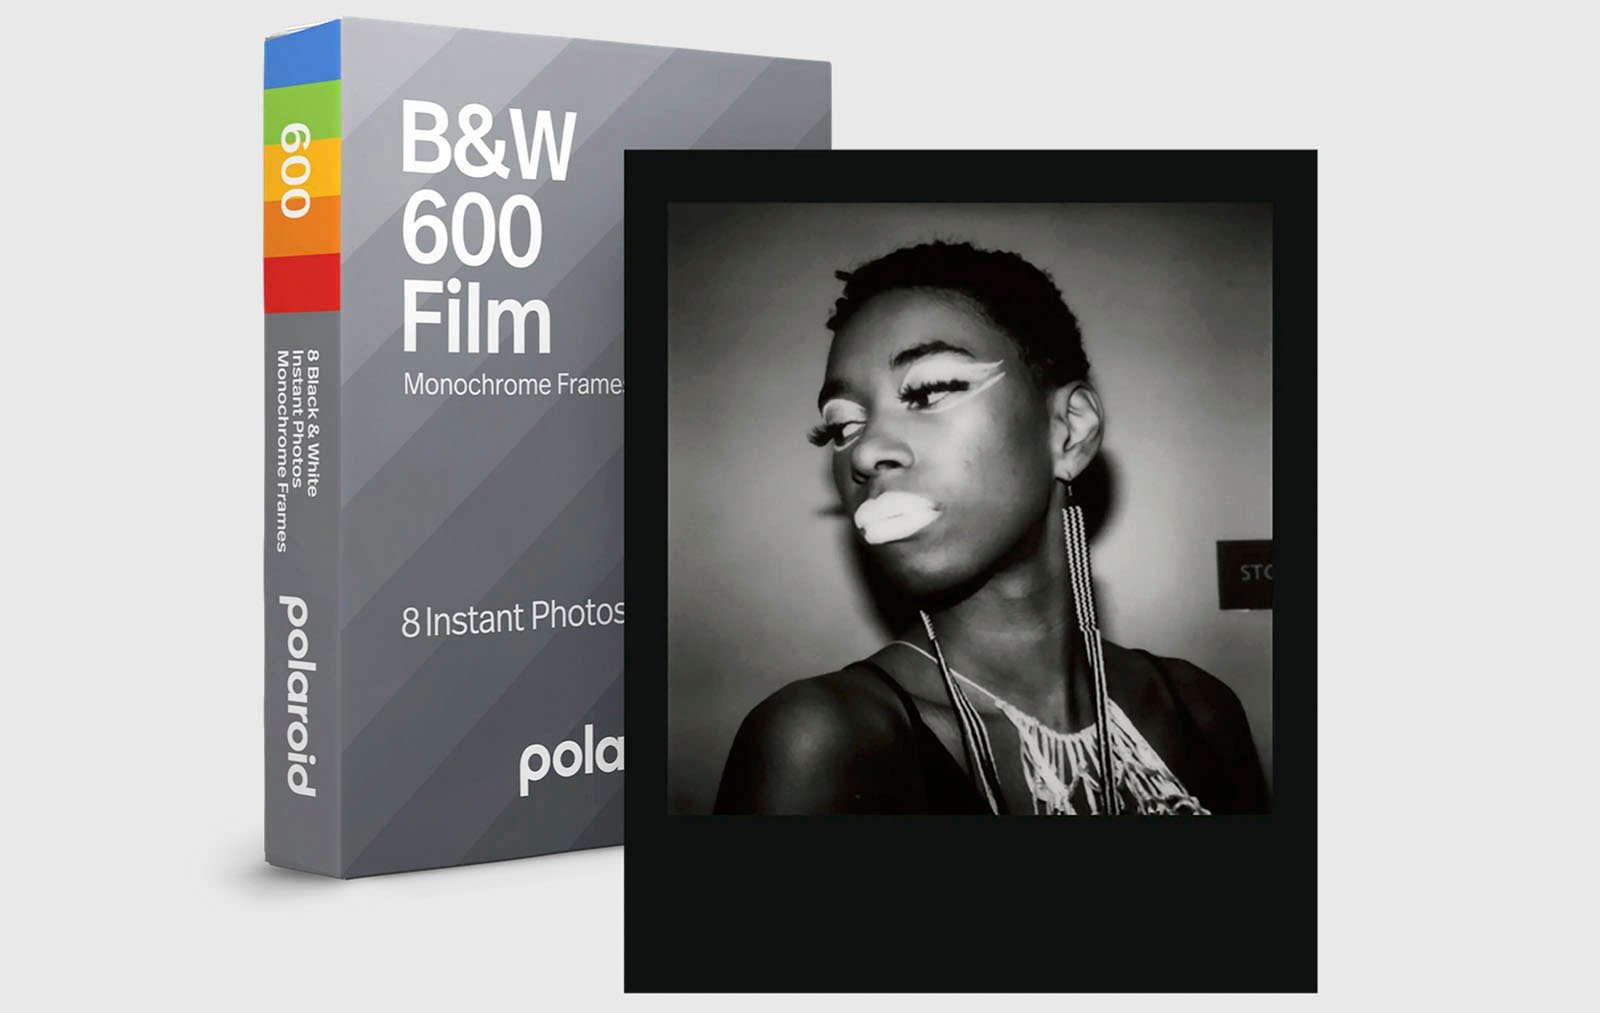 A black and white polaroid photo depicting a woman with striking makeup and earrings, next to a box of b&w 600 film by Polaroid. the image emphasis is on artistic expression through monochrome filters.